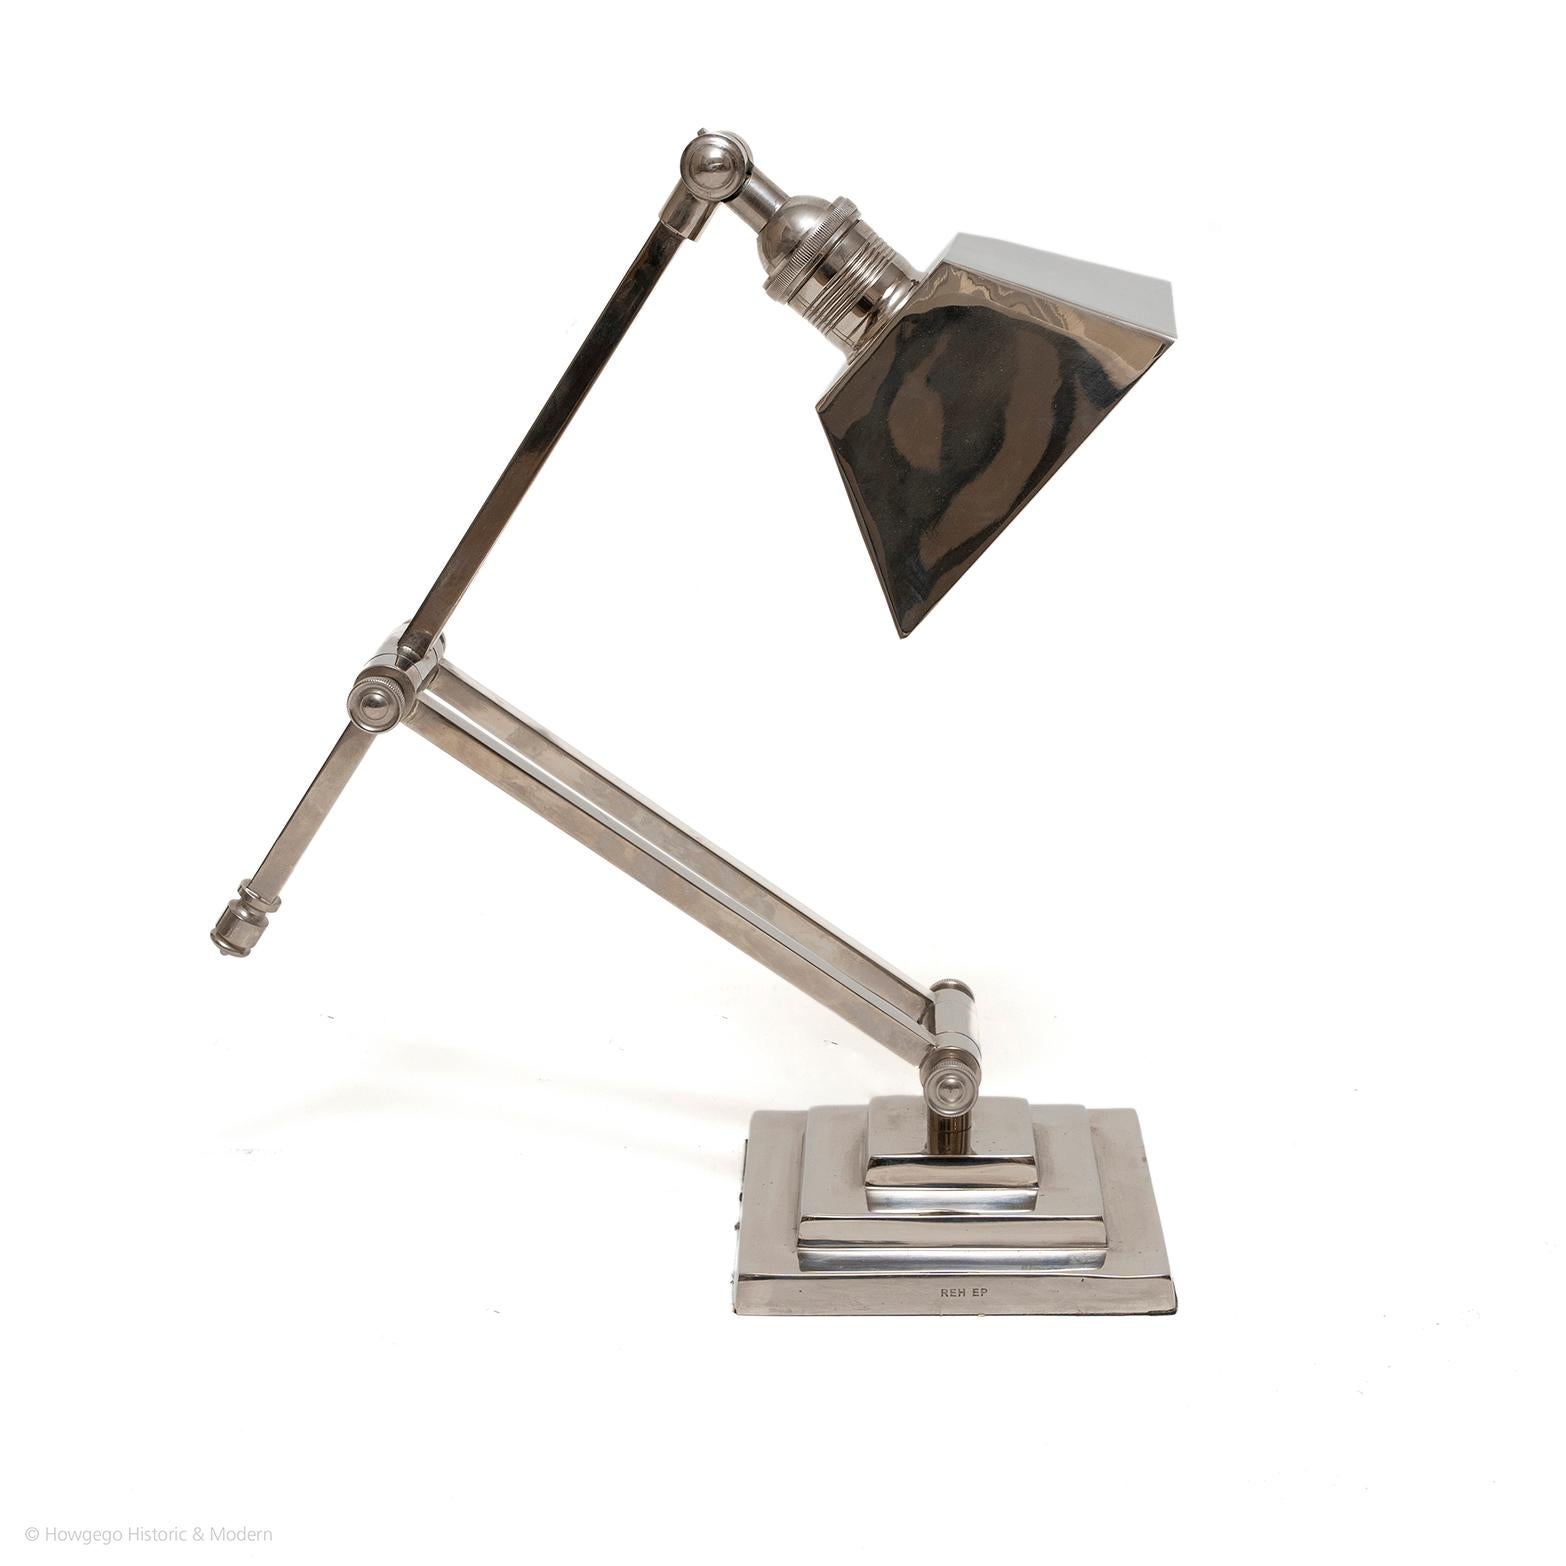 Classic Art Deco design 
Ergonomic with adjustable shade, long swivel arm and support all with screws to fix into position
On a square stepped plinth base, engraved REH EP

The plinth 7.5cm., 3